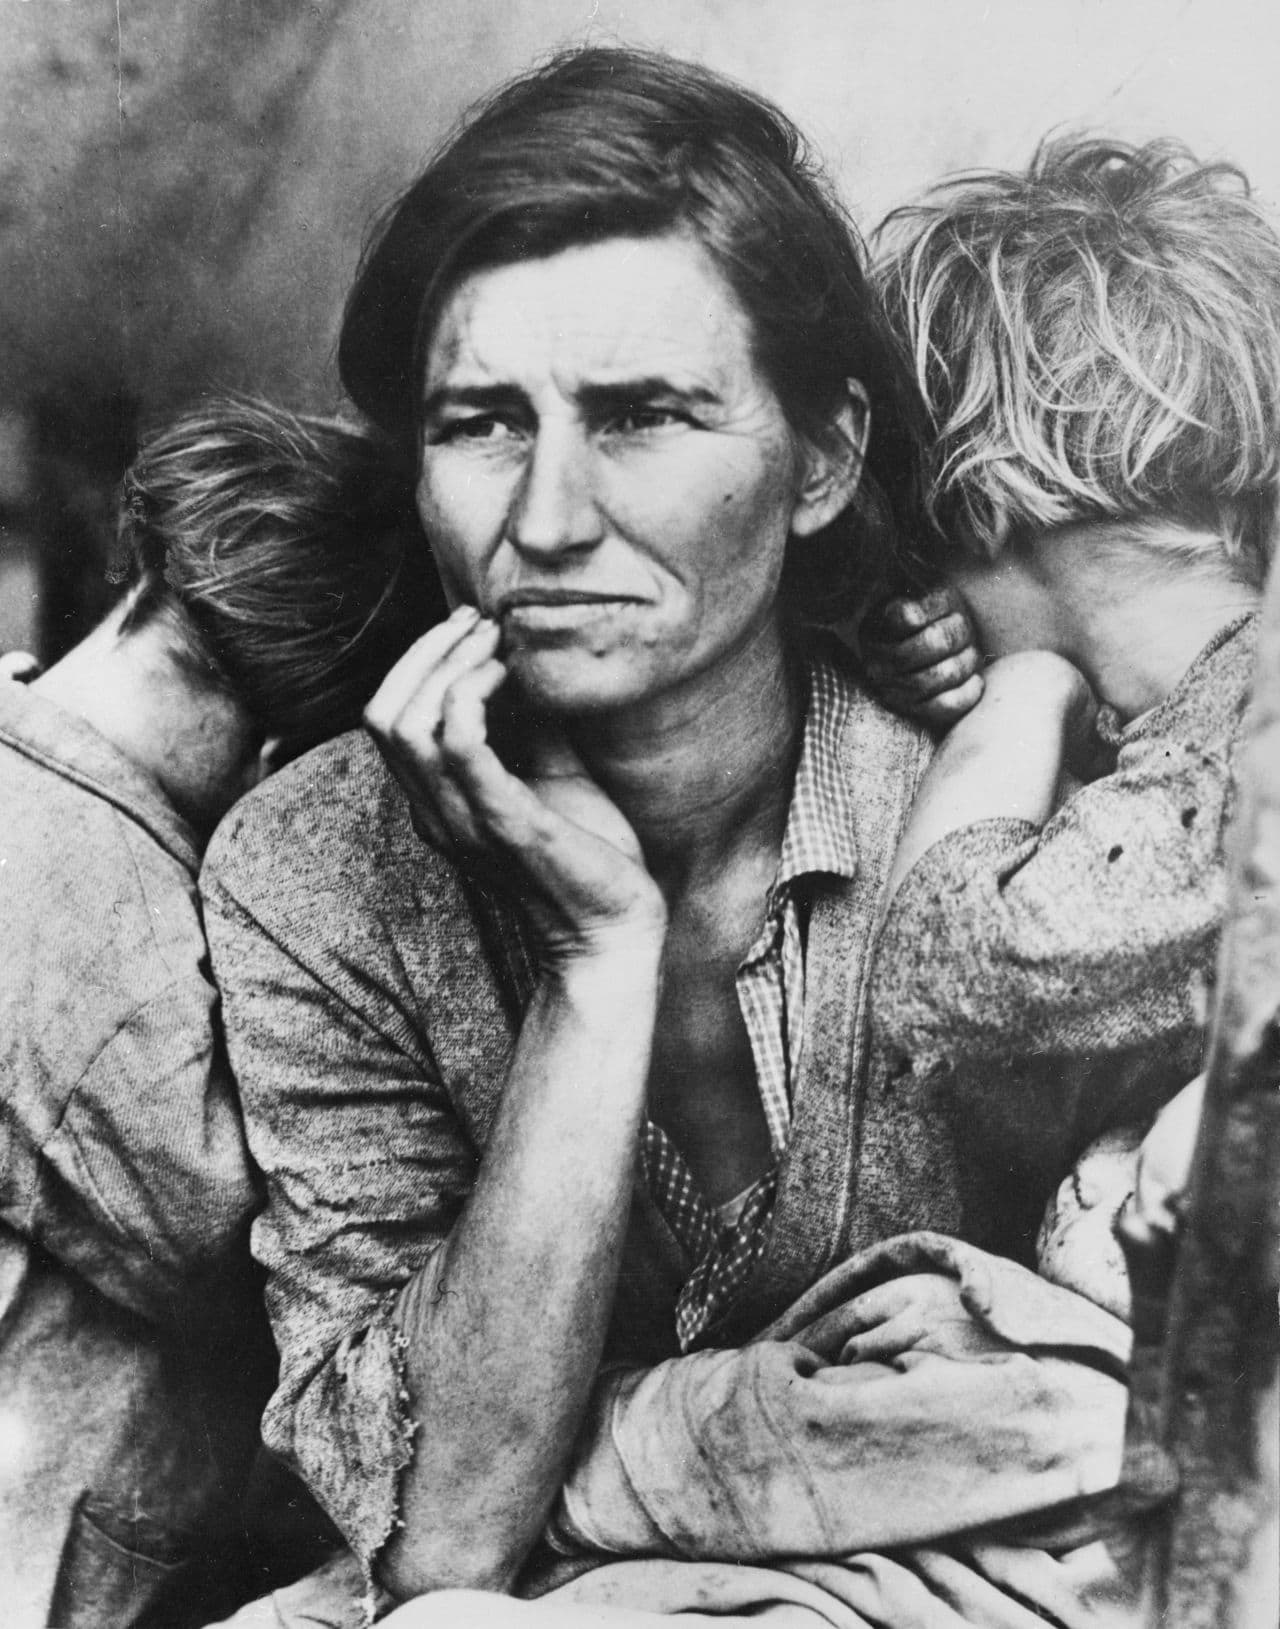 According to Thompson, this image hangs in the hall of Levi's Stadium. (Dorothea Lange/Getty Images)